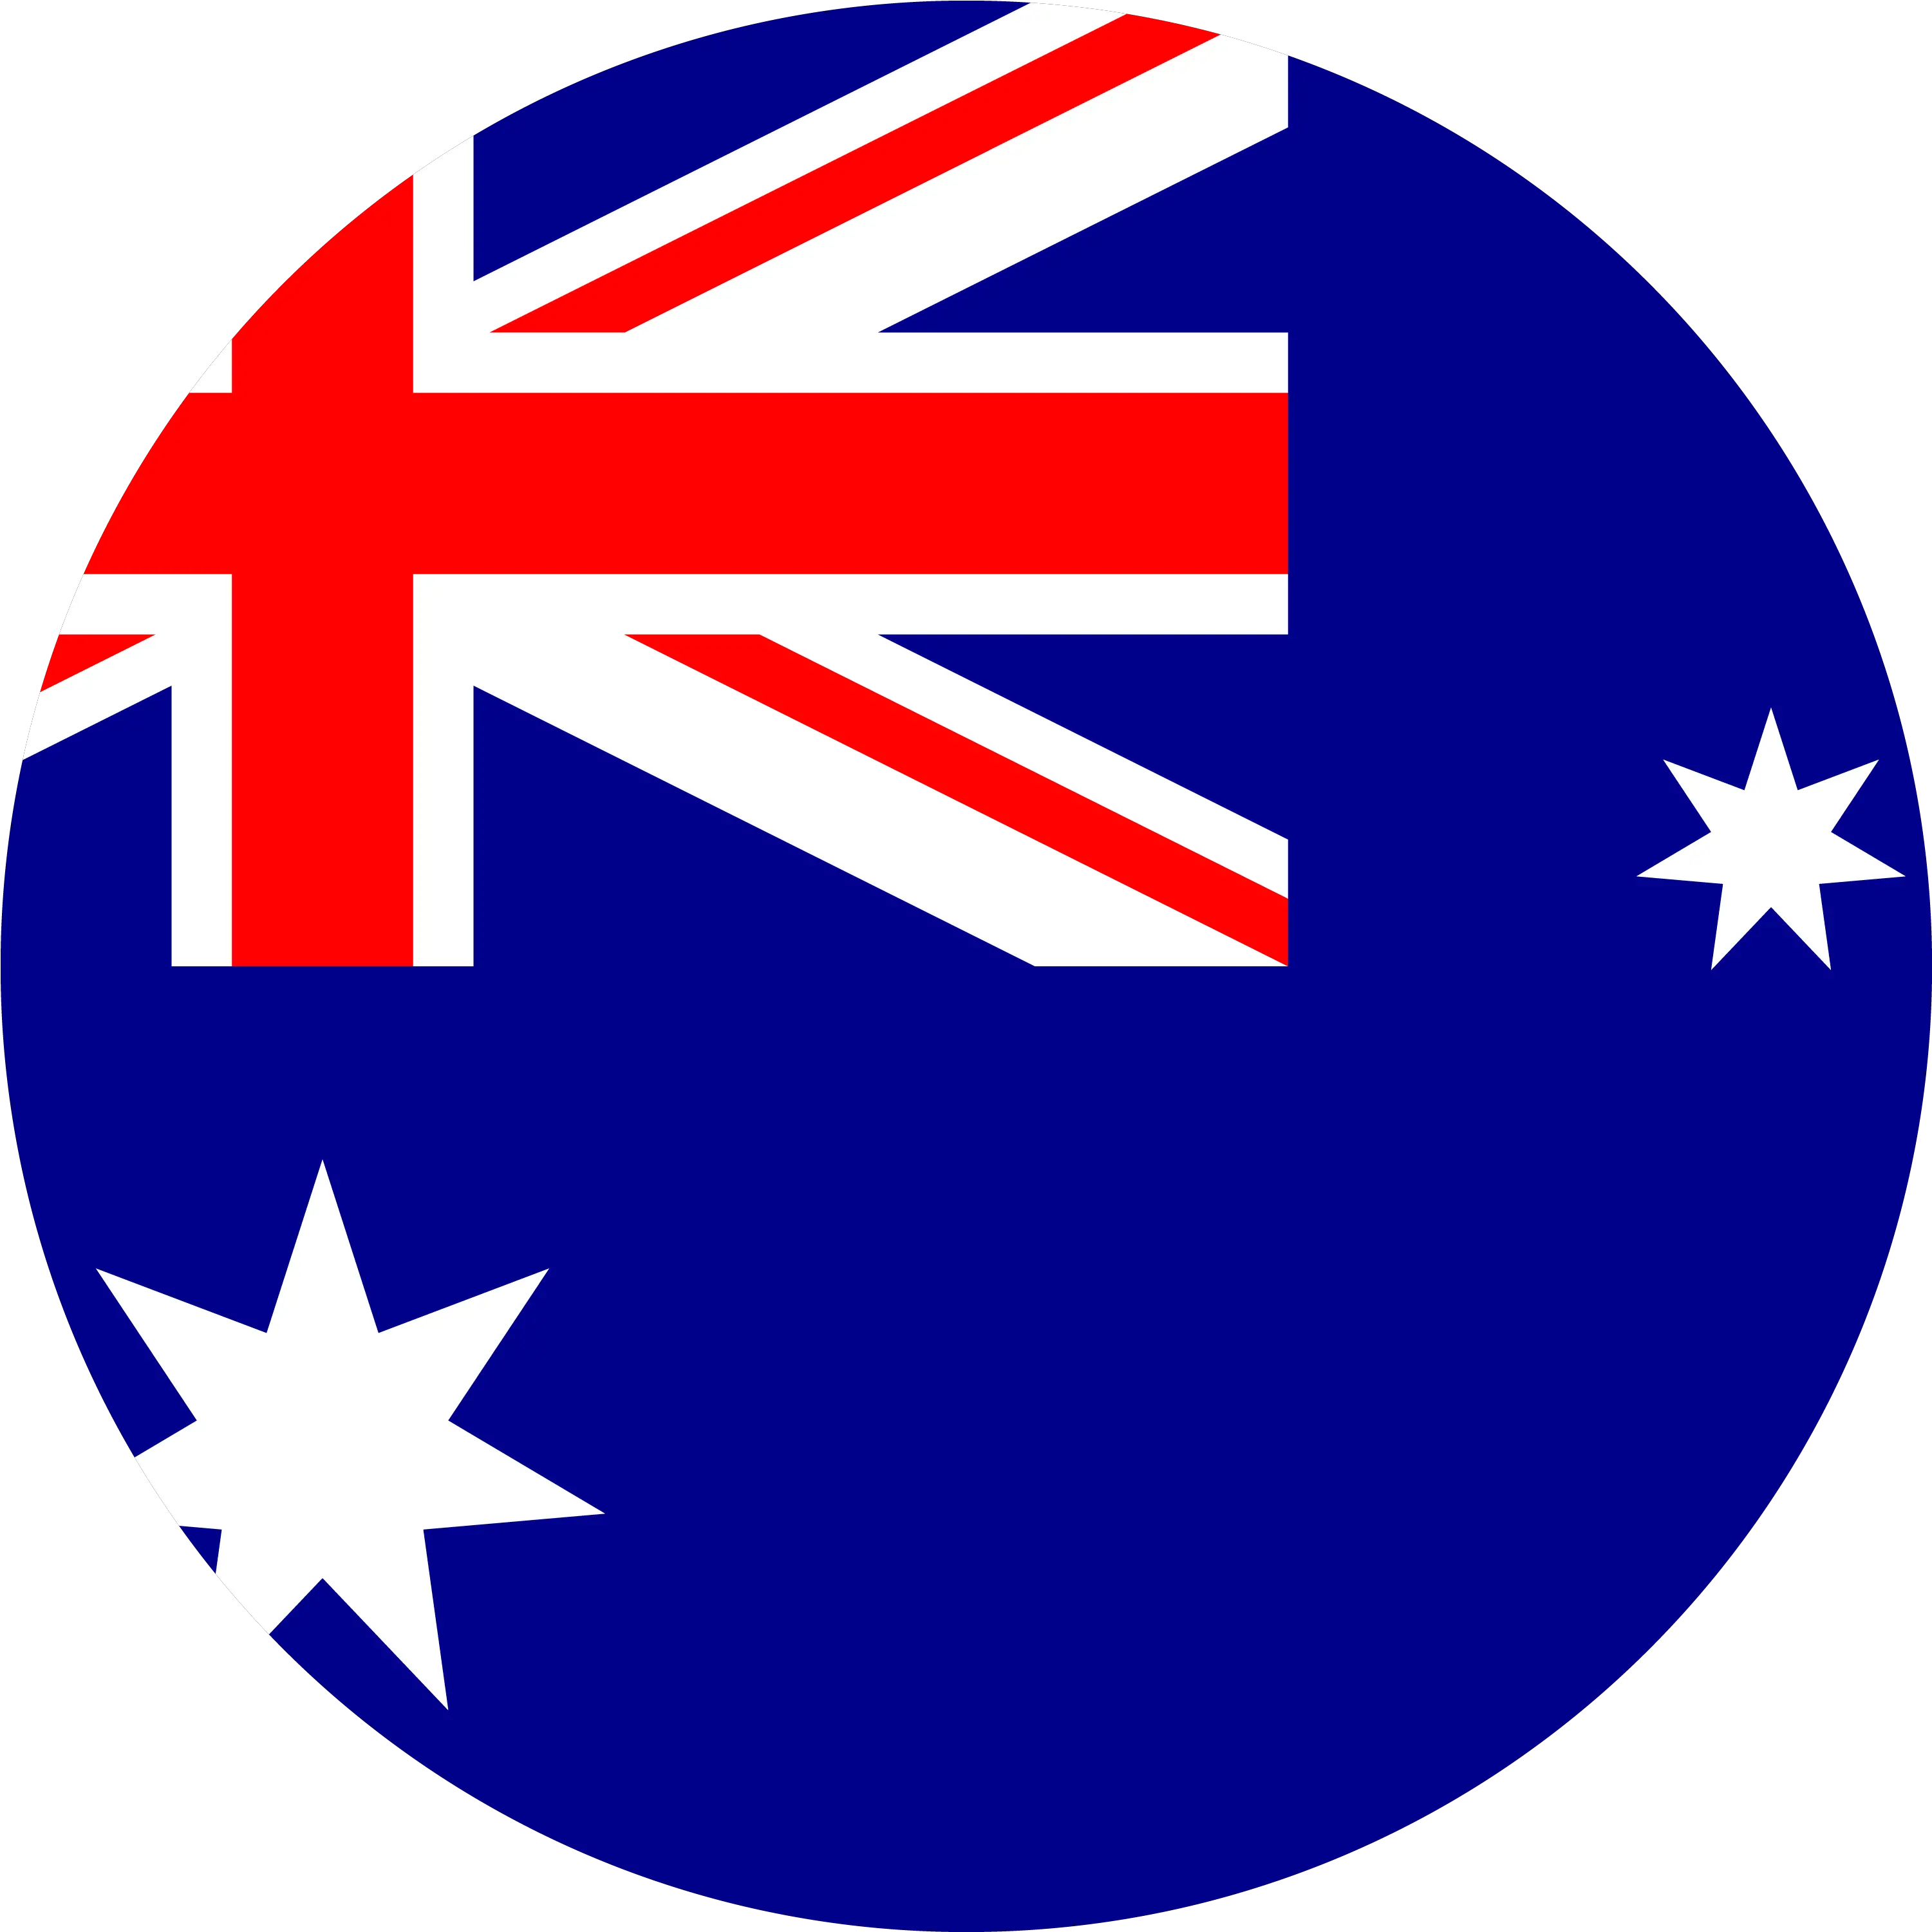 Download Of Flag Australia National France Free Hd Image Australia Flag Round Icon Png France Flag Png